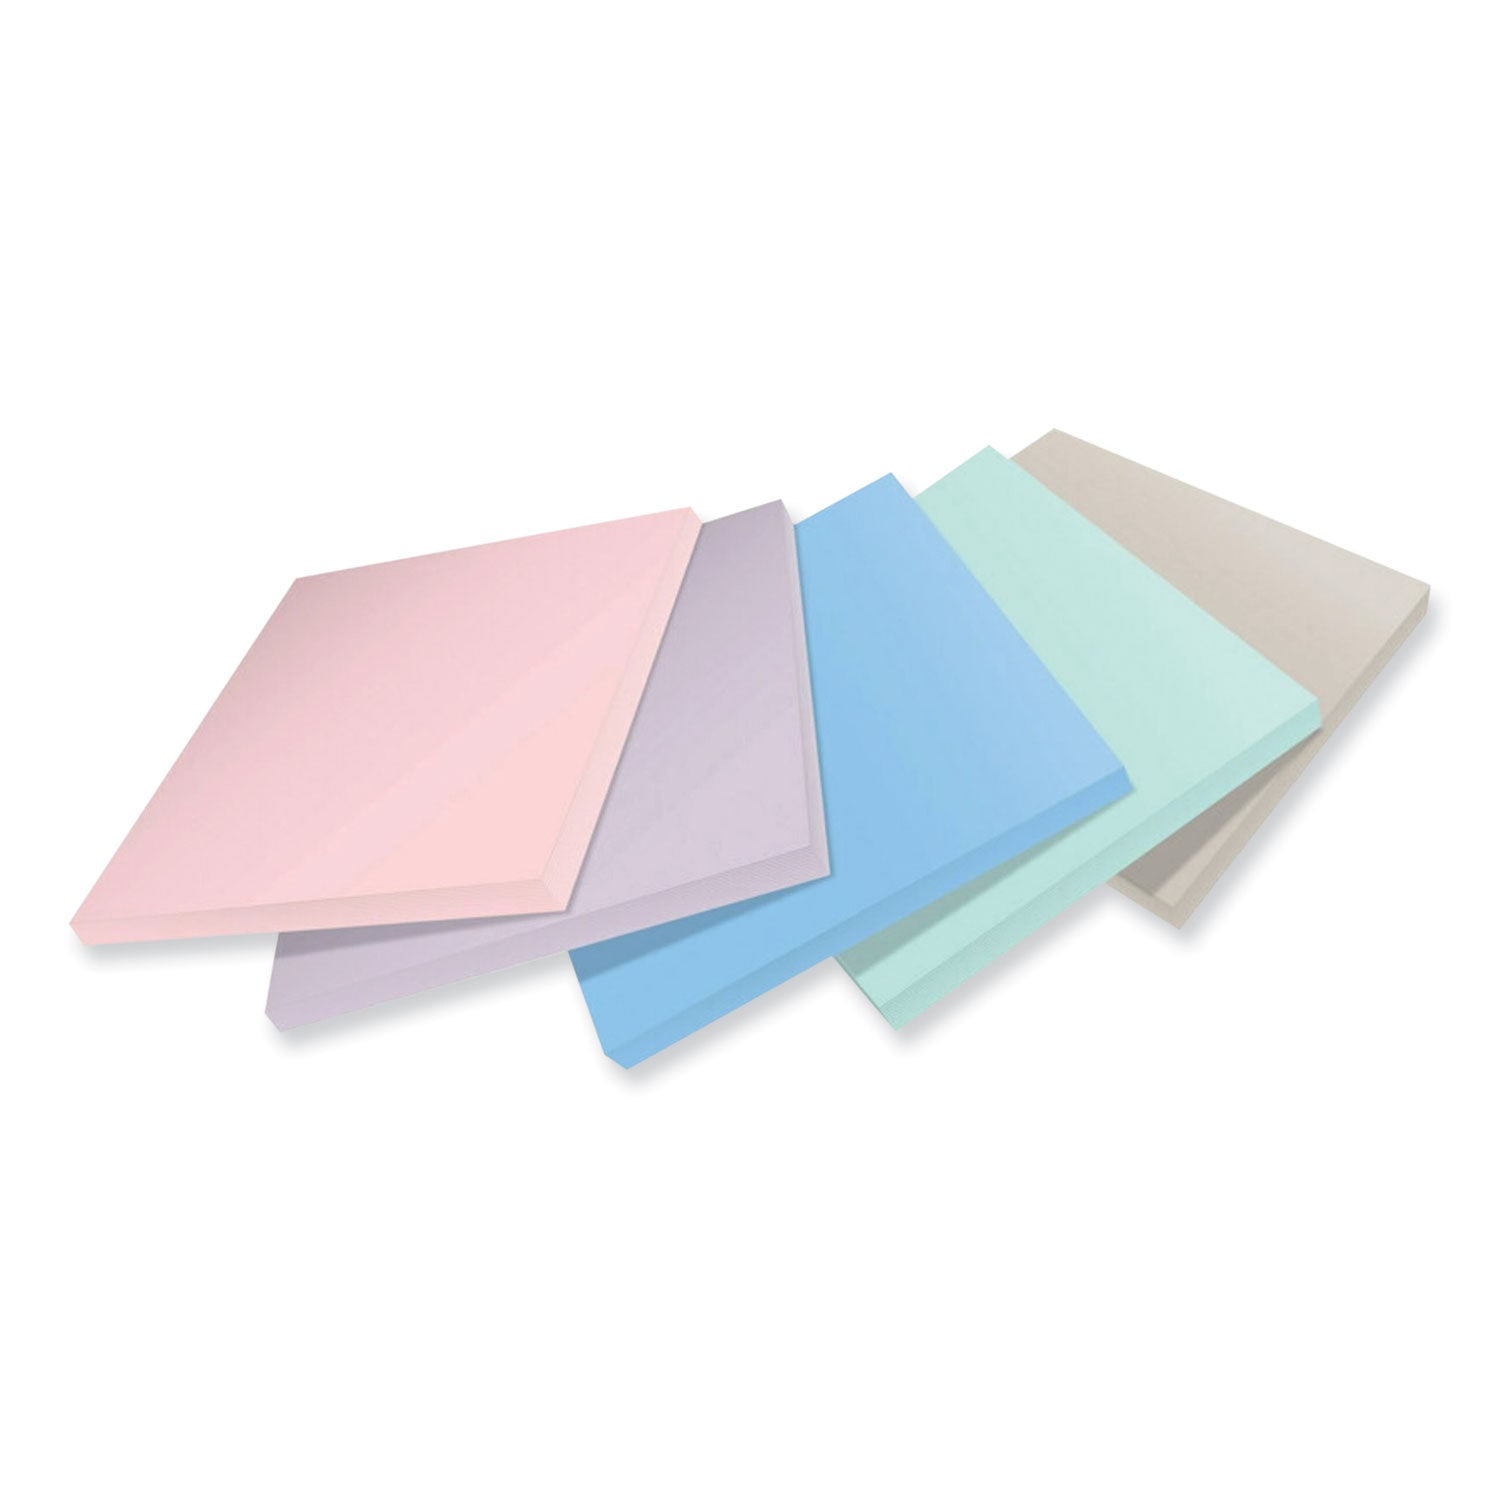 100%-recycled-paper-super-sticky-notes-3-x-3-wanderlust-pastels-70-sheets-pad-5-pads-pack_mmm654r5ssnrp - 2